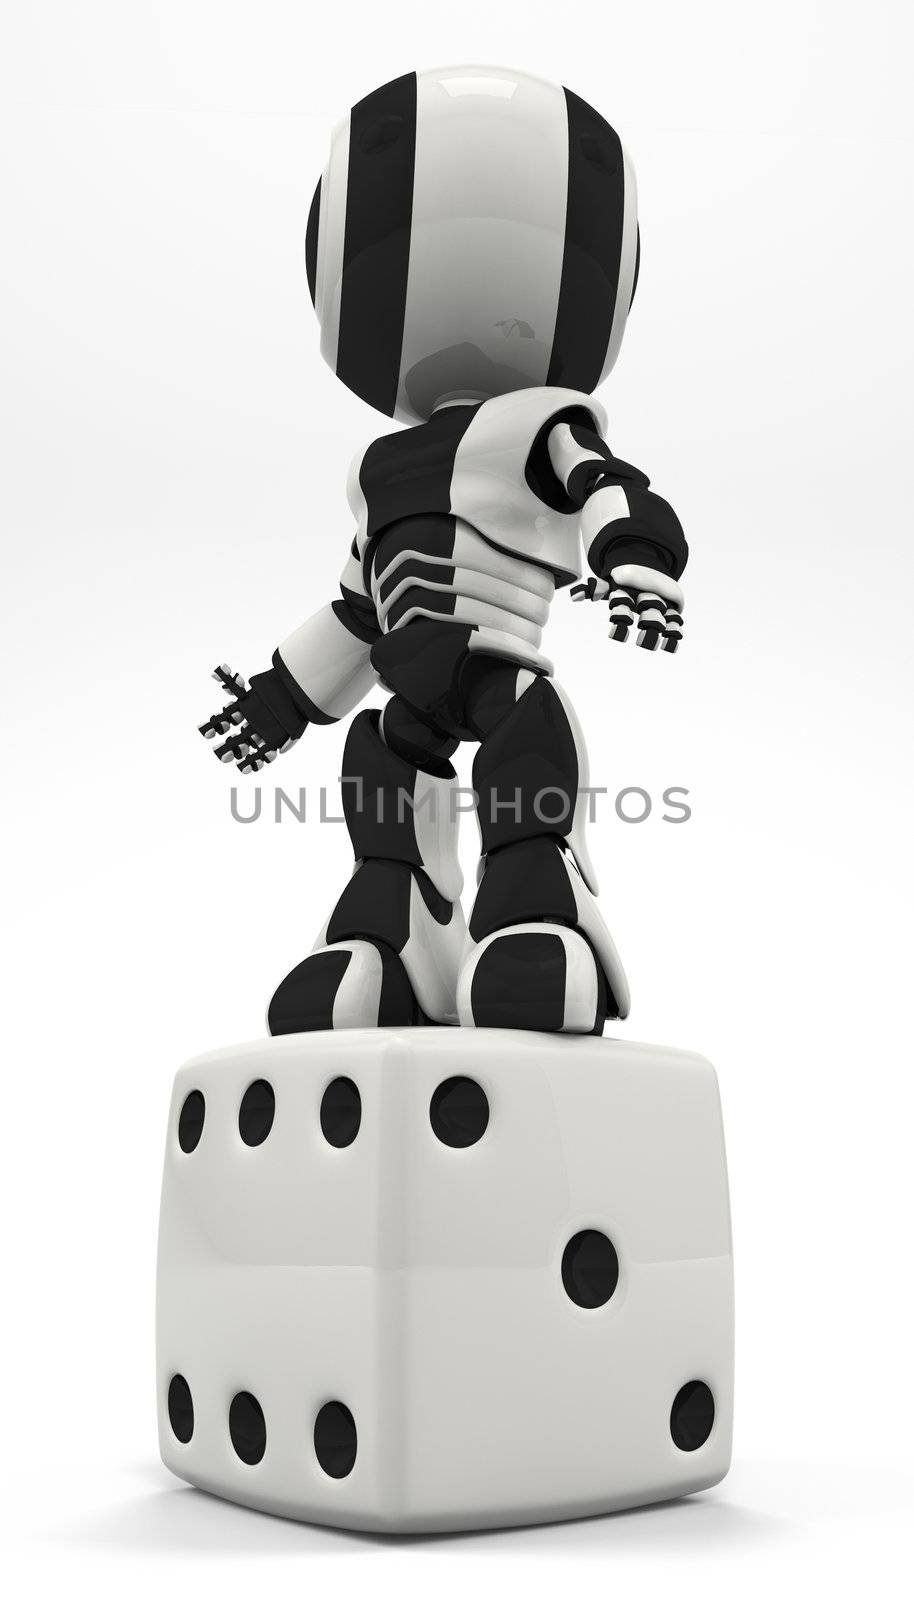 Robot Standing Victorious on Dice by LeoBlanchette